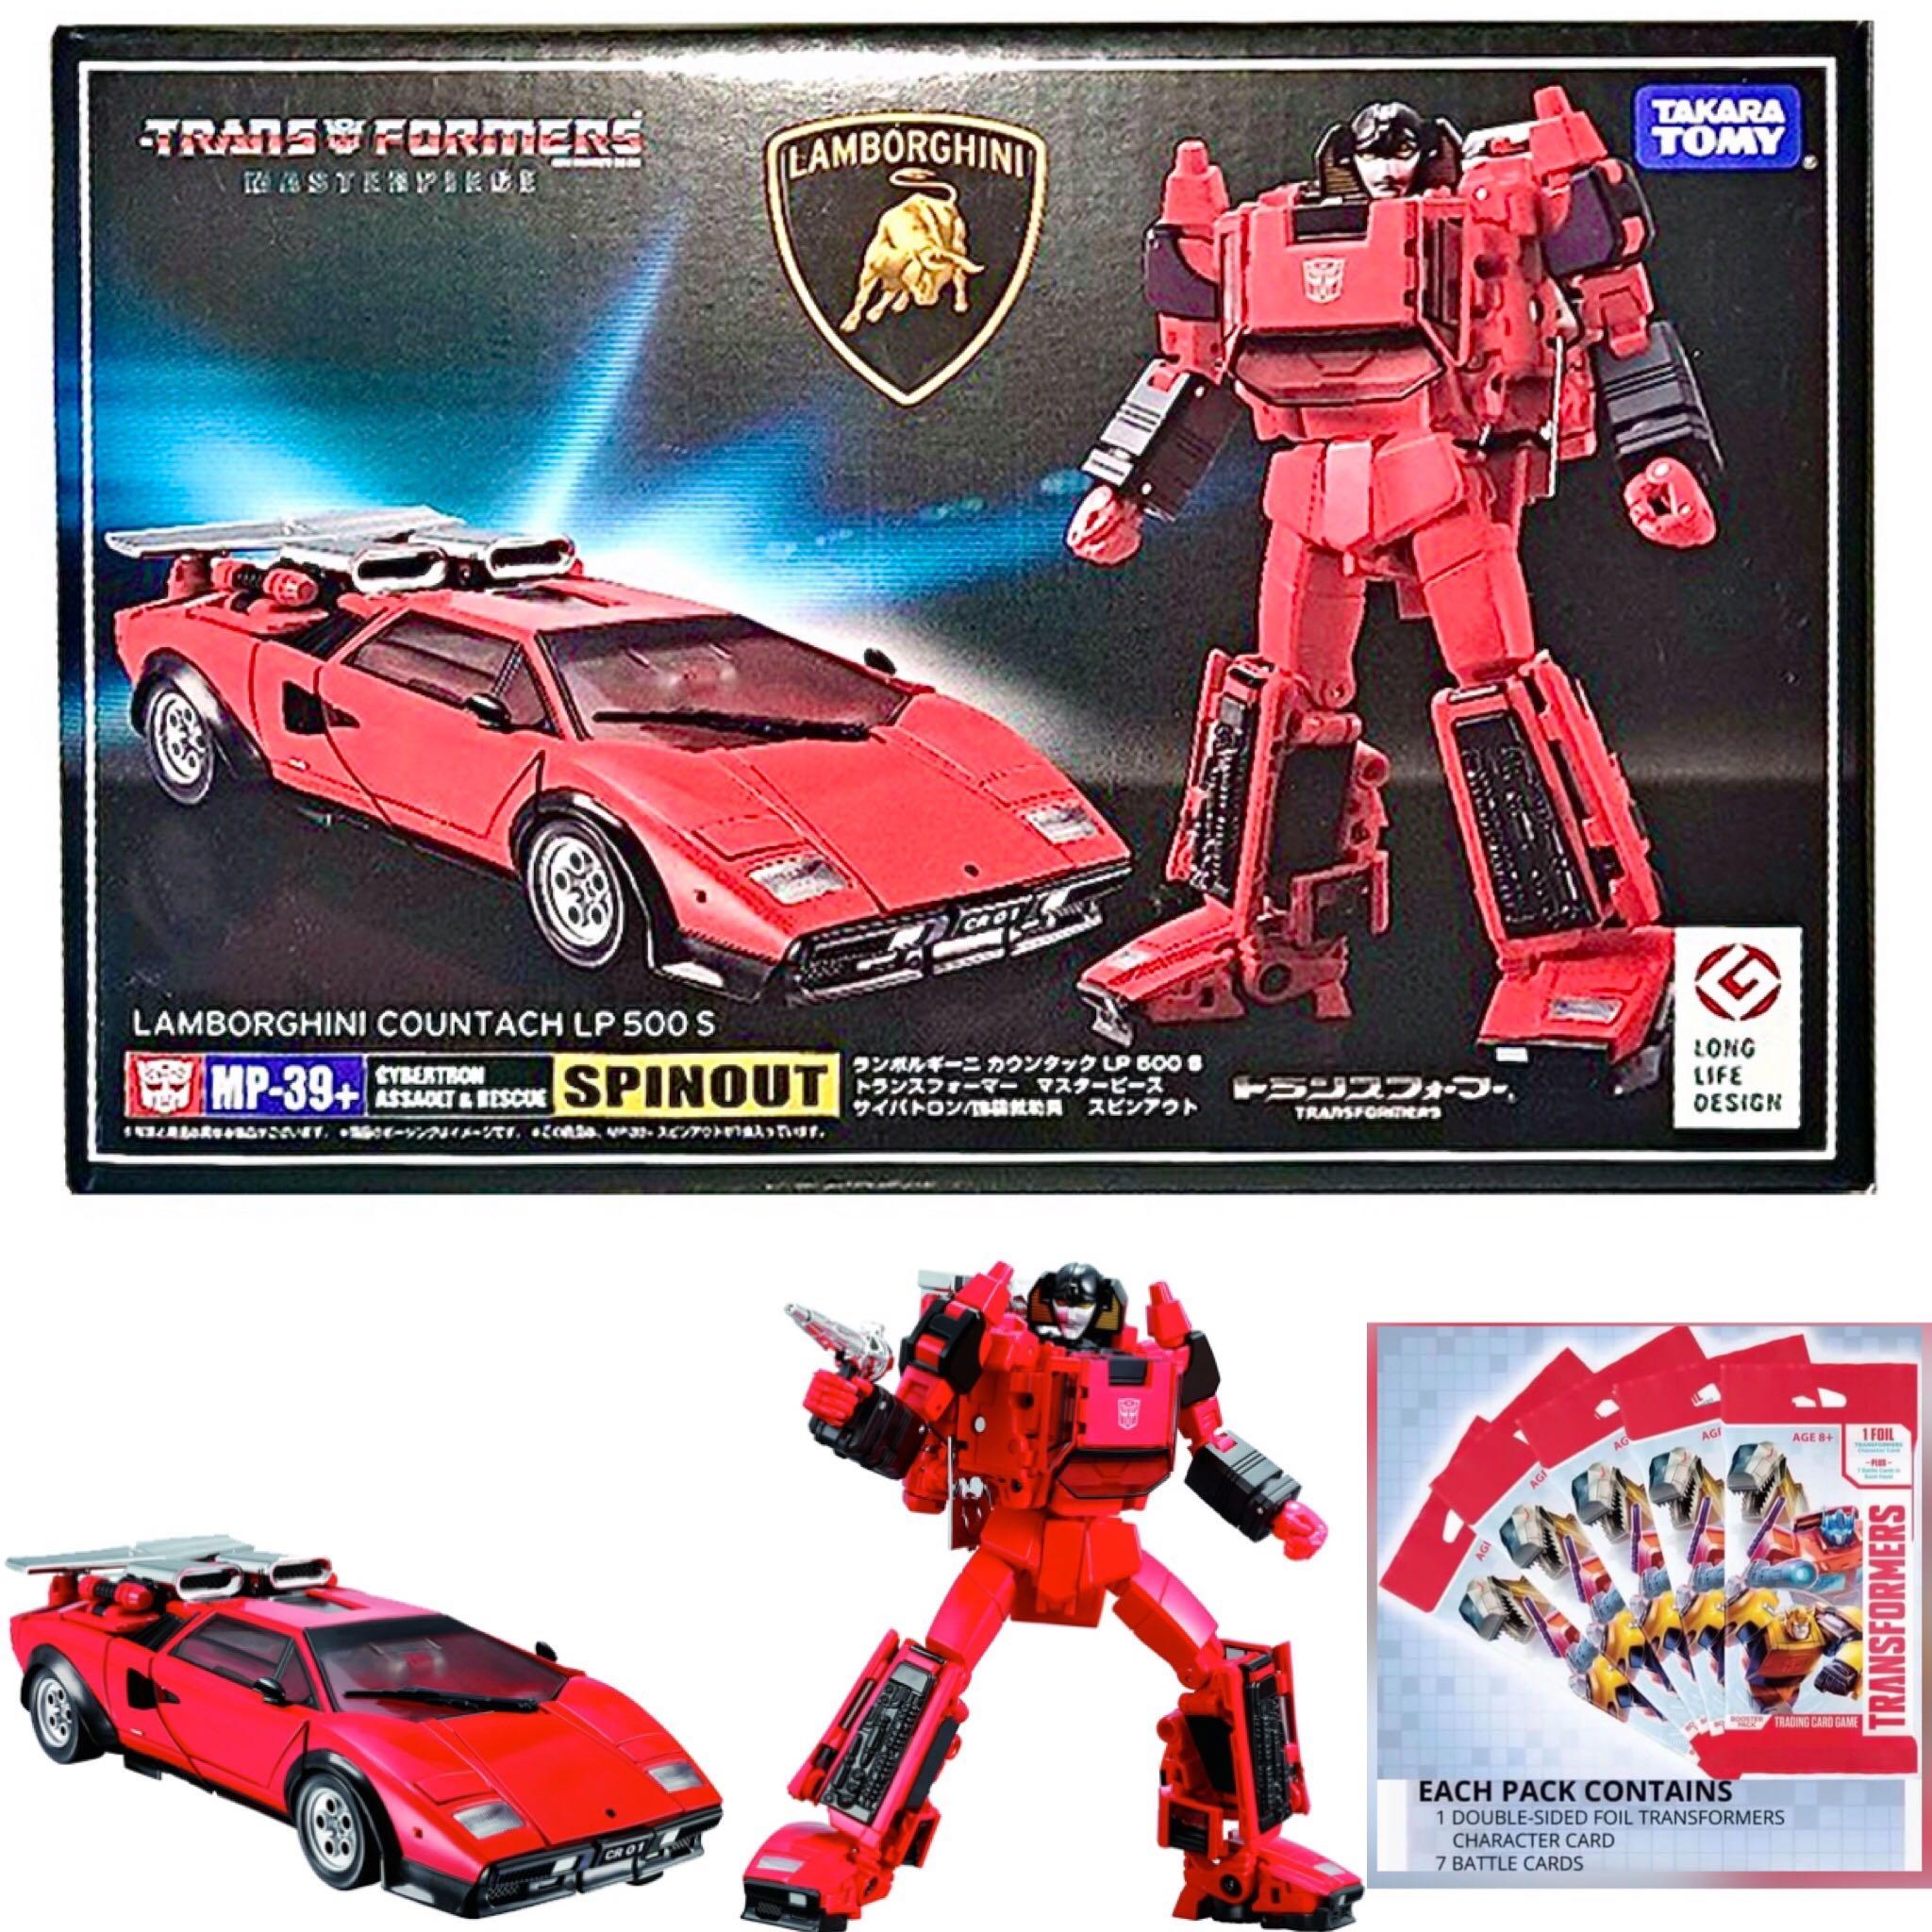 MISB Authentic Takara Tomy Transformers Masterpiece MP-39+ Spinout (Red  Sunstreaker) Lamborghini Countach LP500S Autobot Spin-Out Decepticon Japan  Exclusive Deluxe Edition Action Figure bundled with complimentary TCG  Cards, Brand New, Sealed & Unopened,